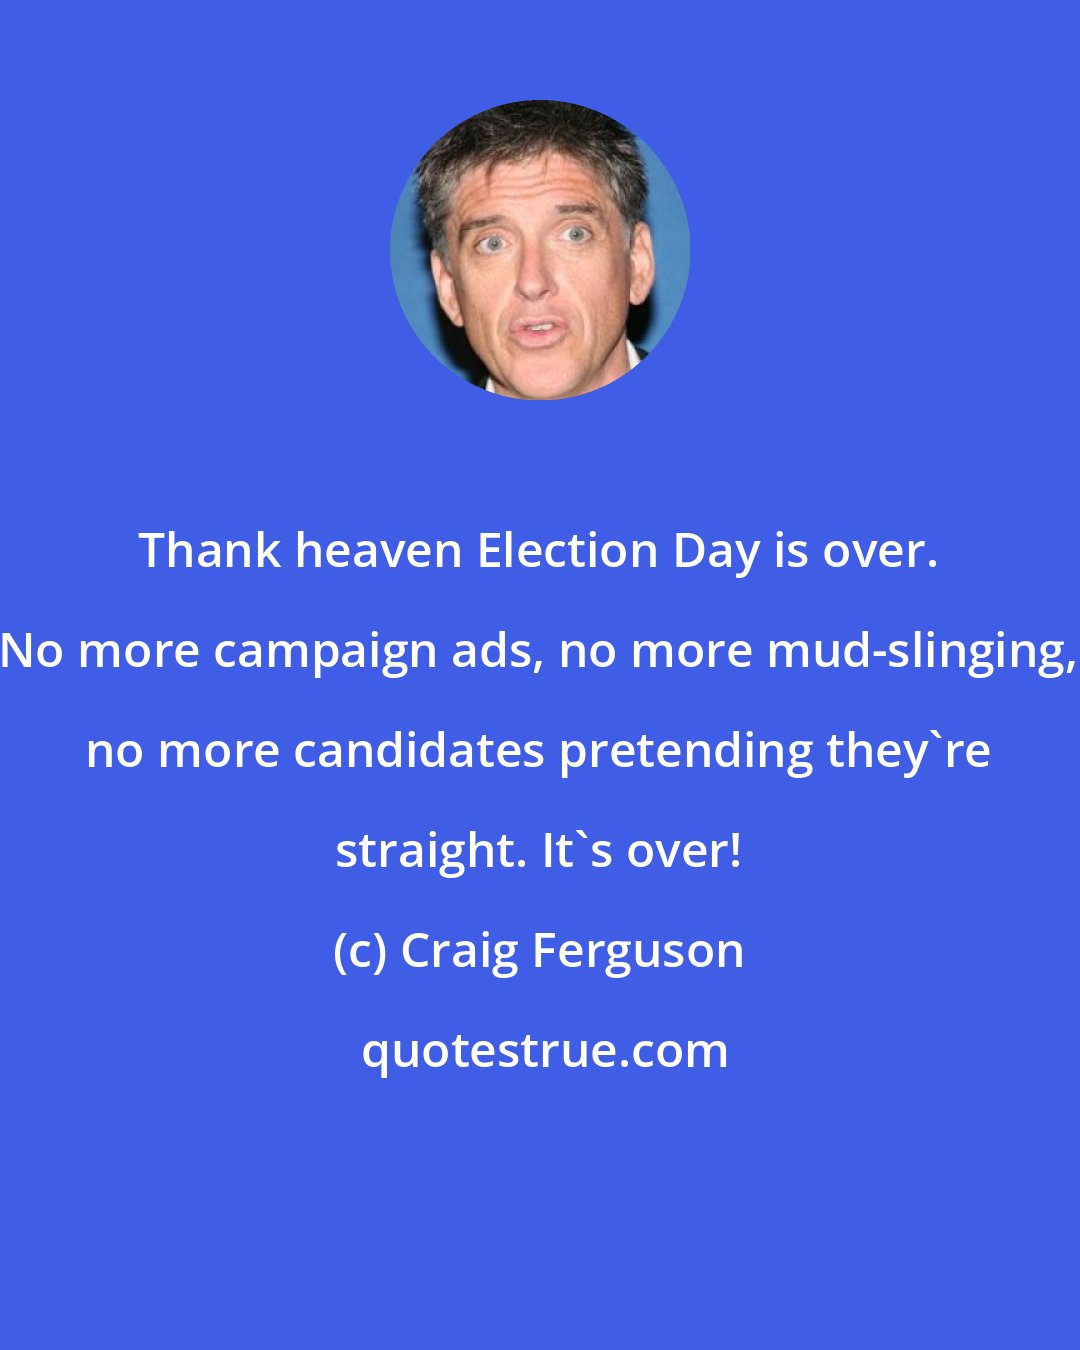 Craig Ferguson: Thank heaven Election Day is over. No more campaign ads, no more mud-slinging, no more candidates pretending they're straight. It's over!